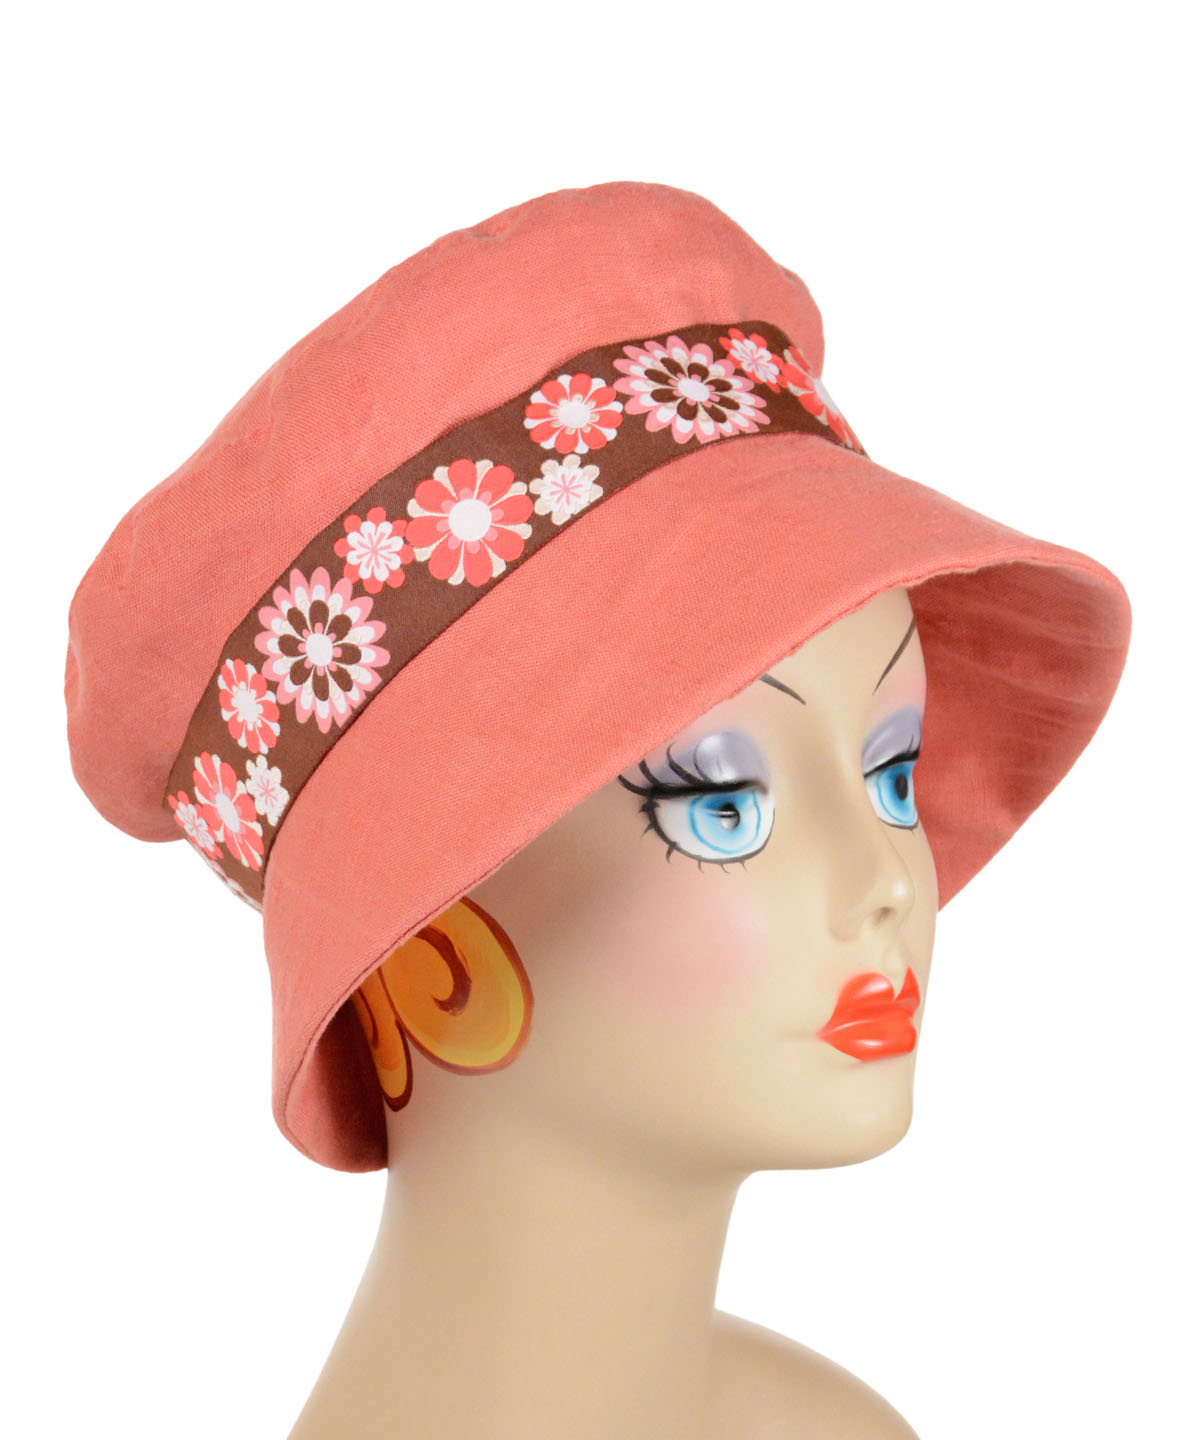 Molly Bucket Hat | Linen in Camelia with Jacquard Floral Band | Handmade USA Pandemonium Millinery